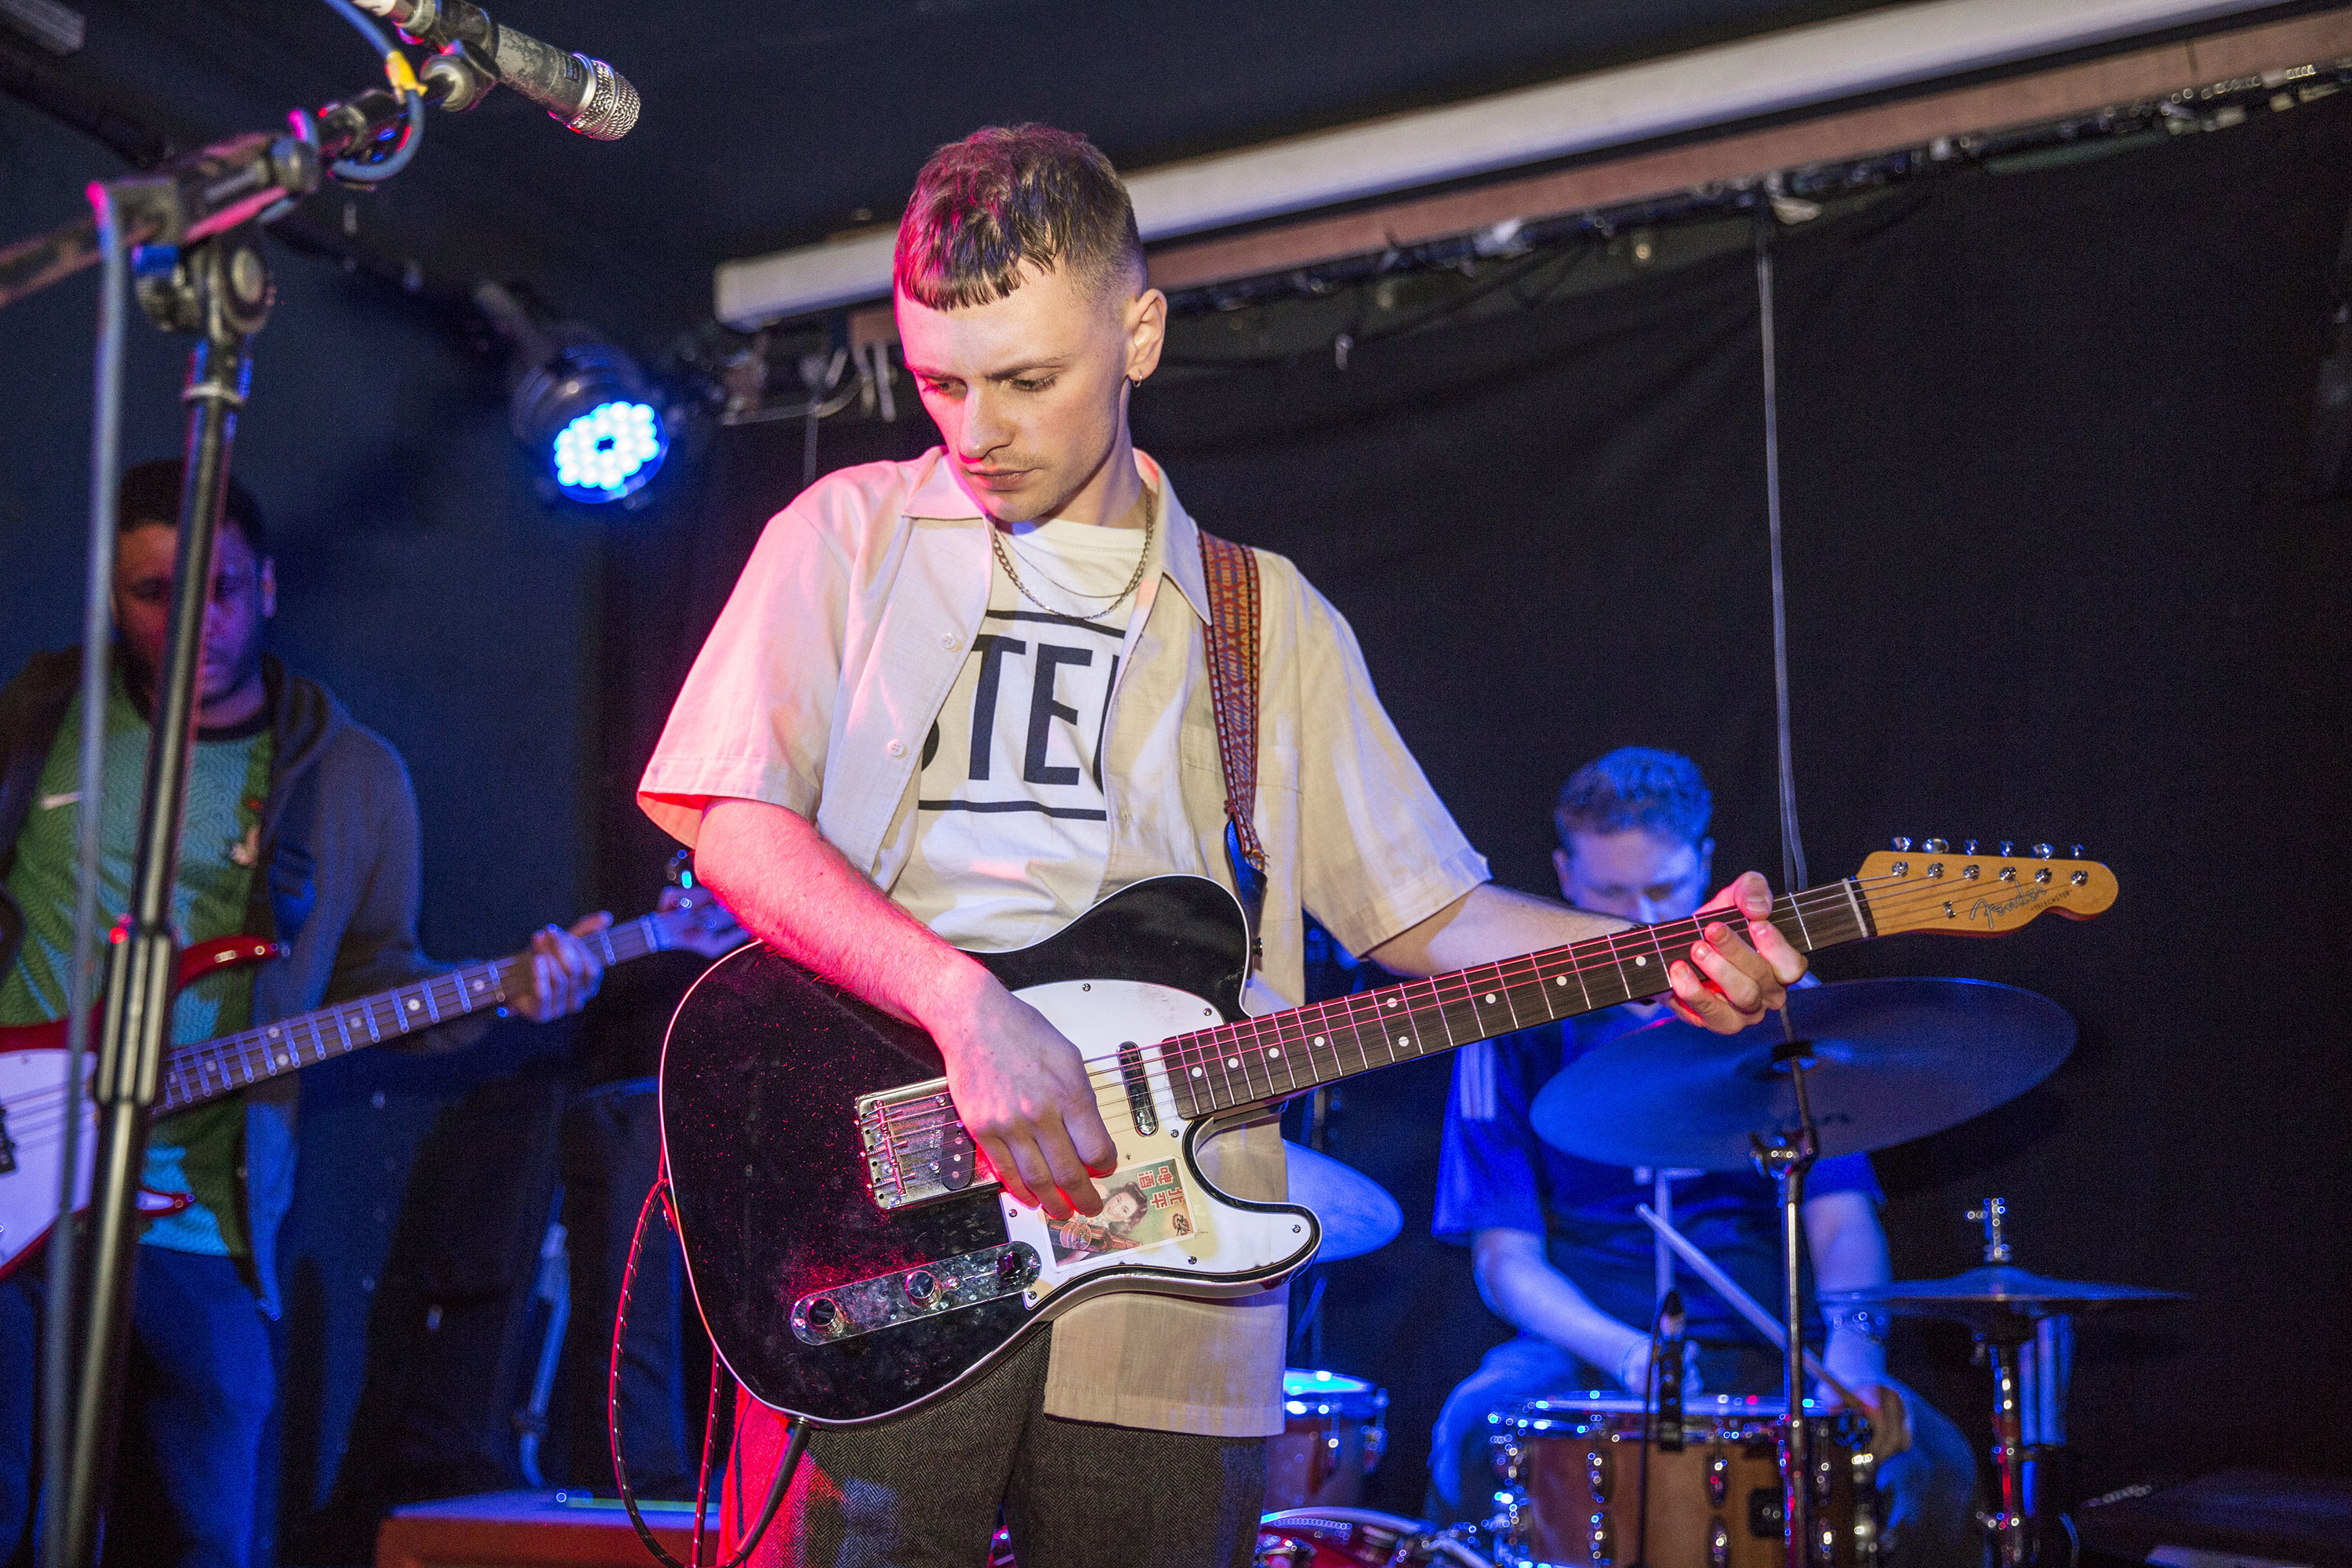 Swimming Tapes & Girl Ray opt for escapism at Hello 2017